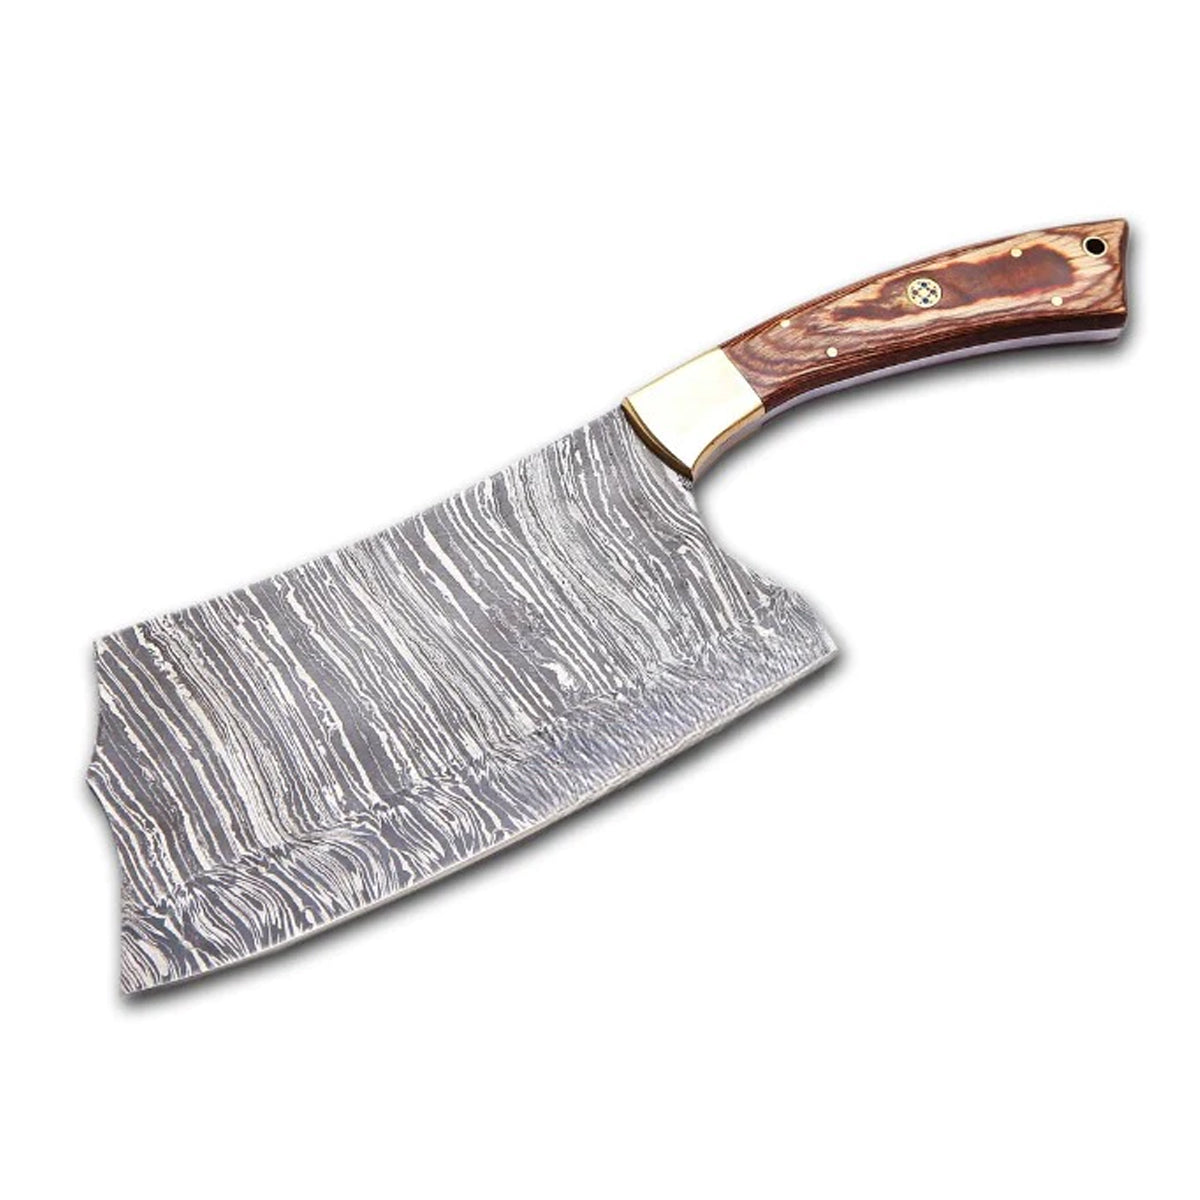 Damascus Meat Cleaver With Pakka Wood Handle - Notbrand